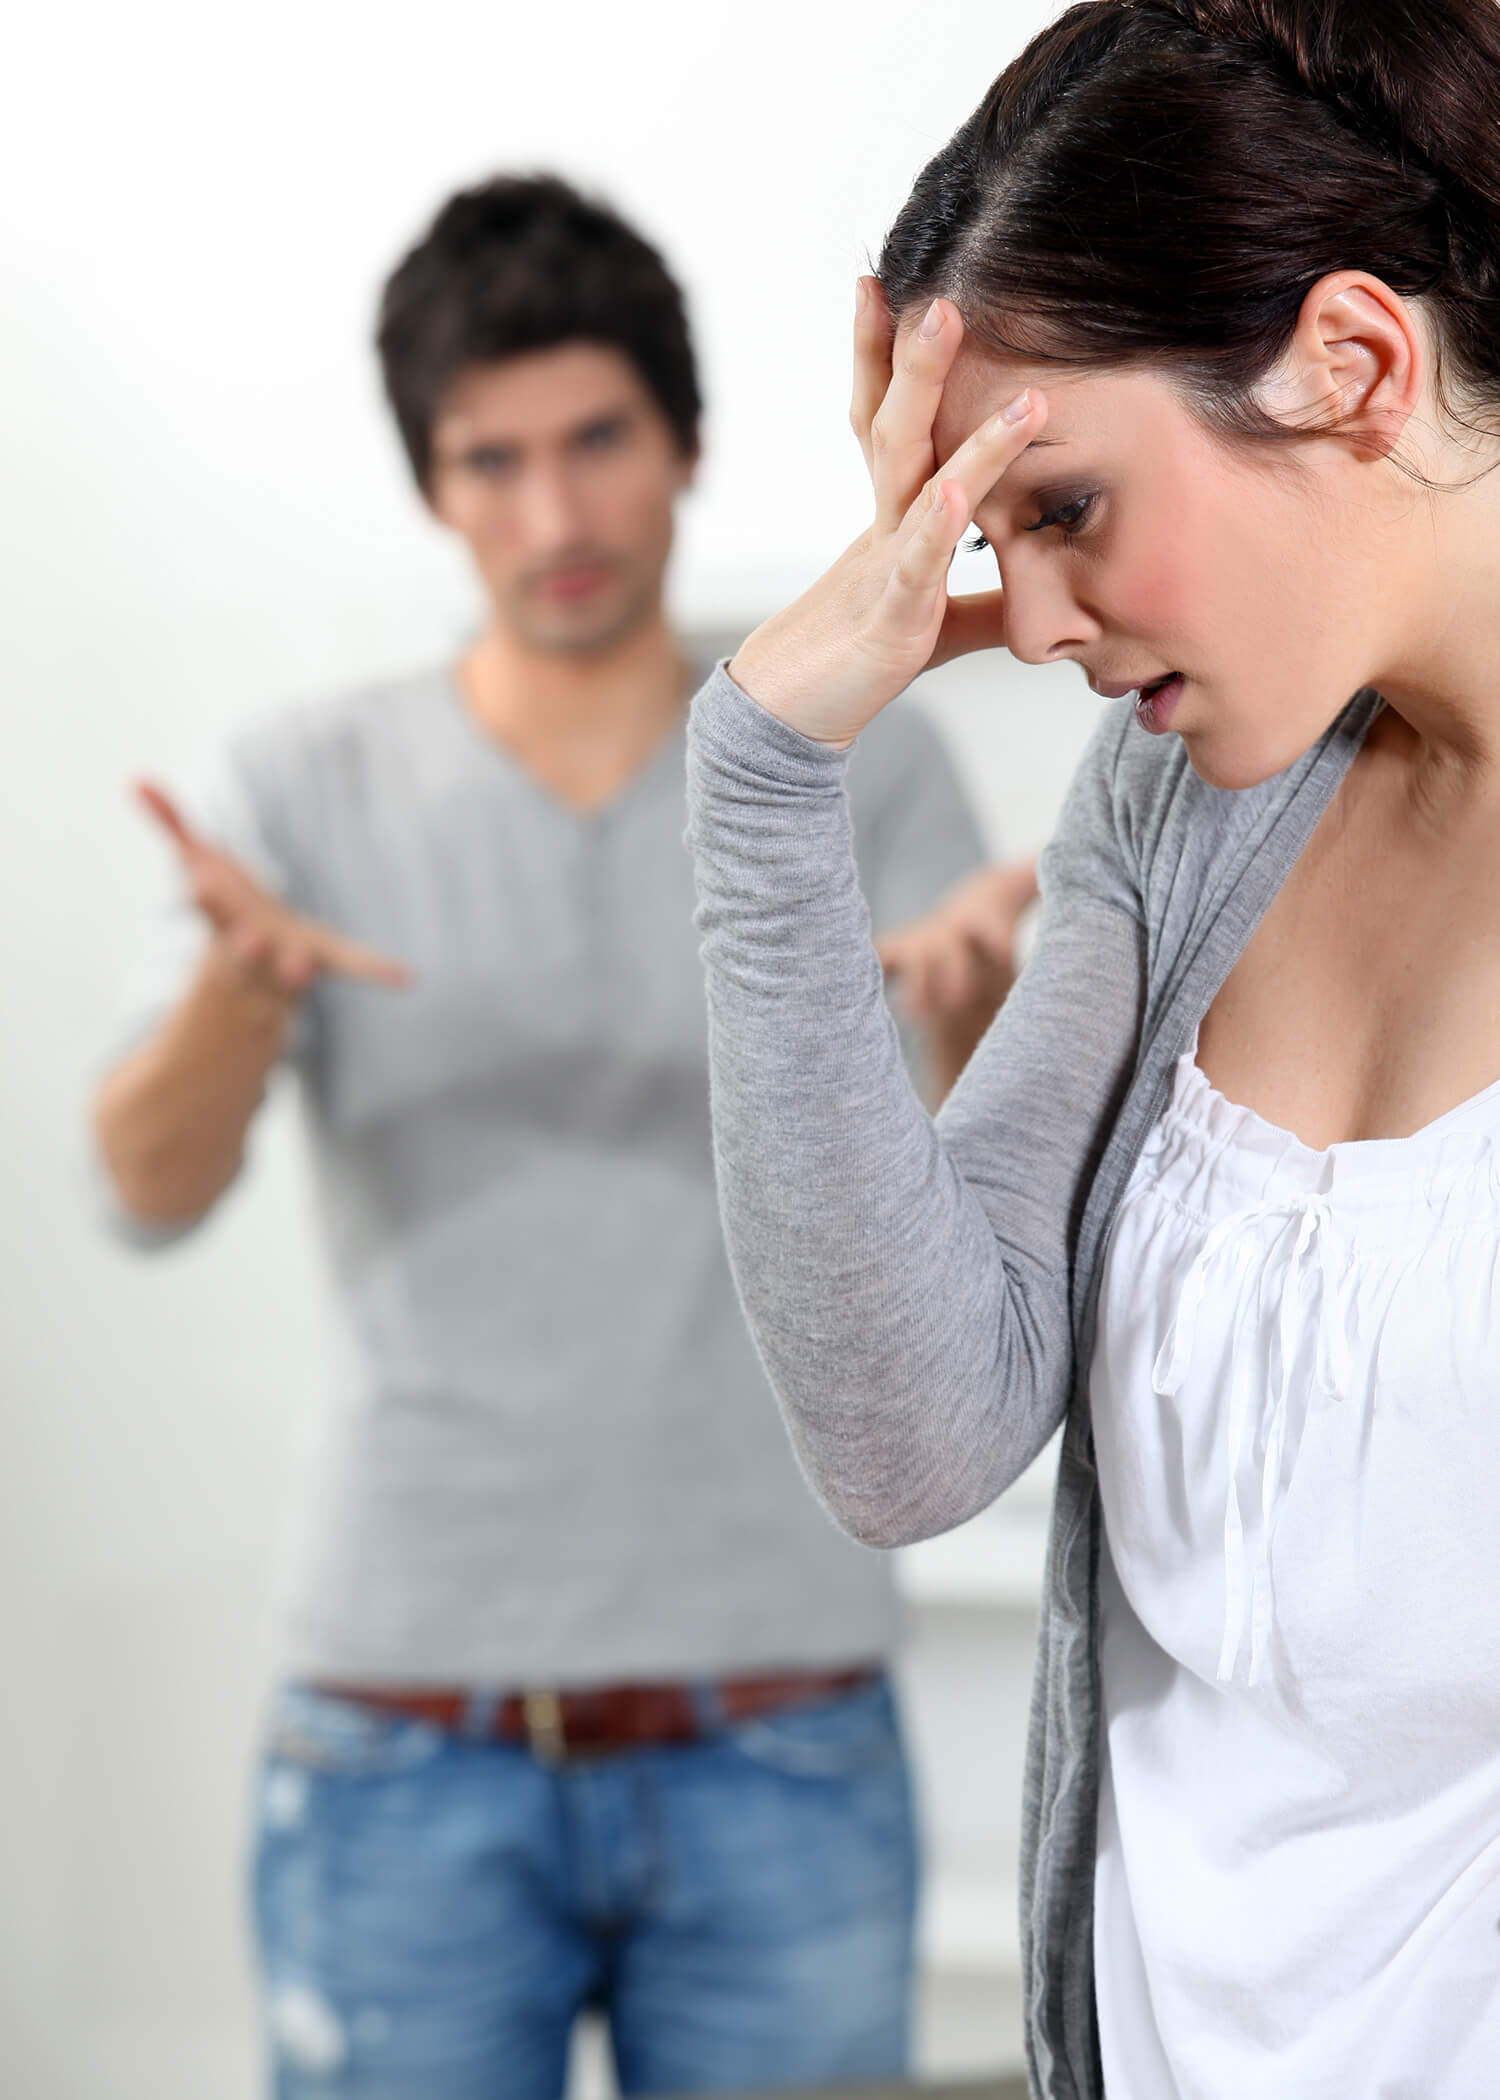 Image of a woman with her hand held to her forehead while a man in the background holds two hands out to her. The woman represents individuals who could benefit from searching for "DBT program in Los Angeles, CA" and working with a DBT therapist in Torrance, CA. 90274 | 90275